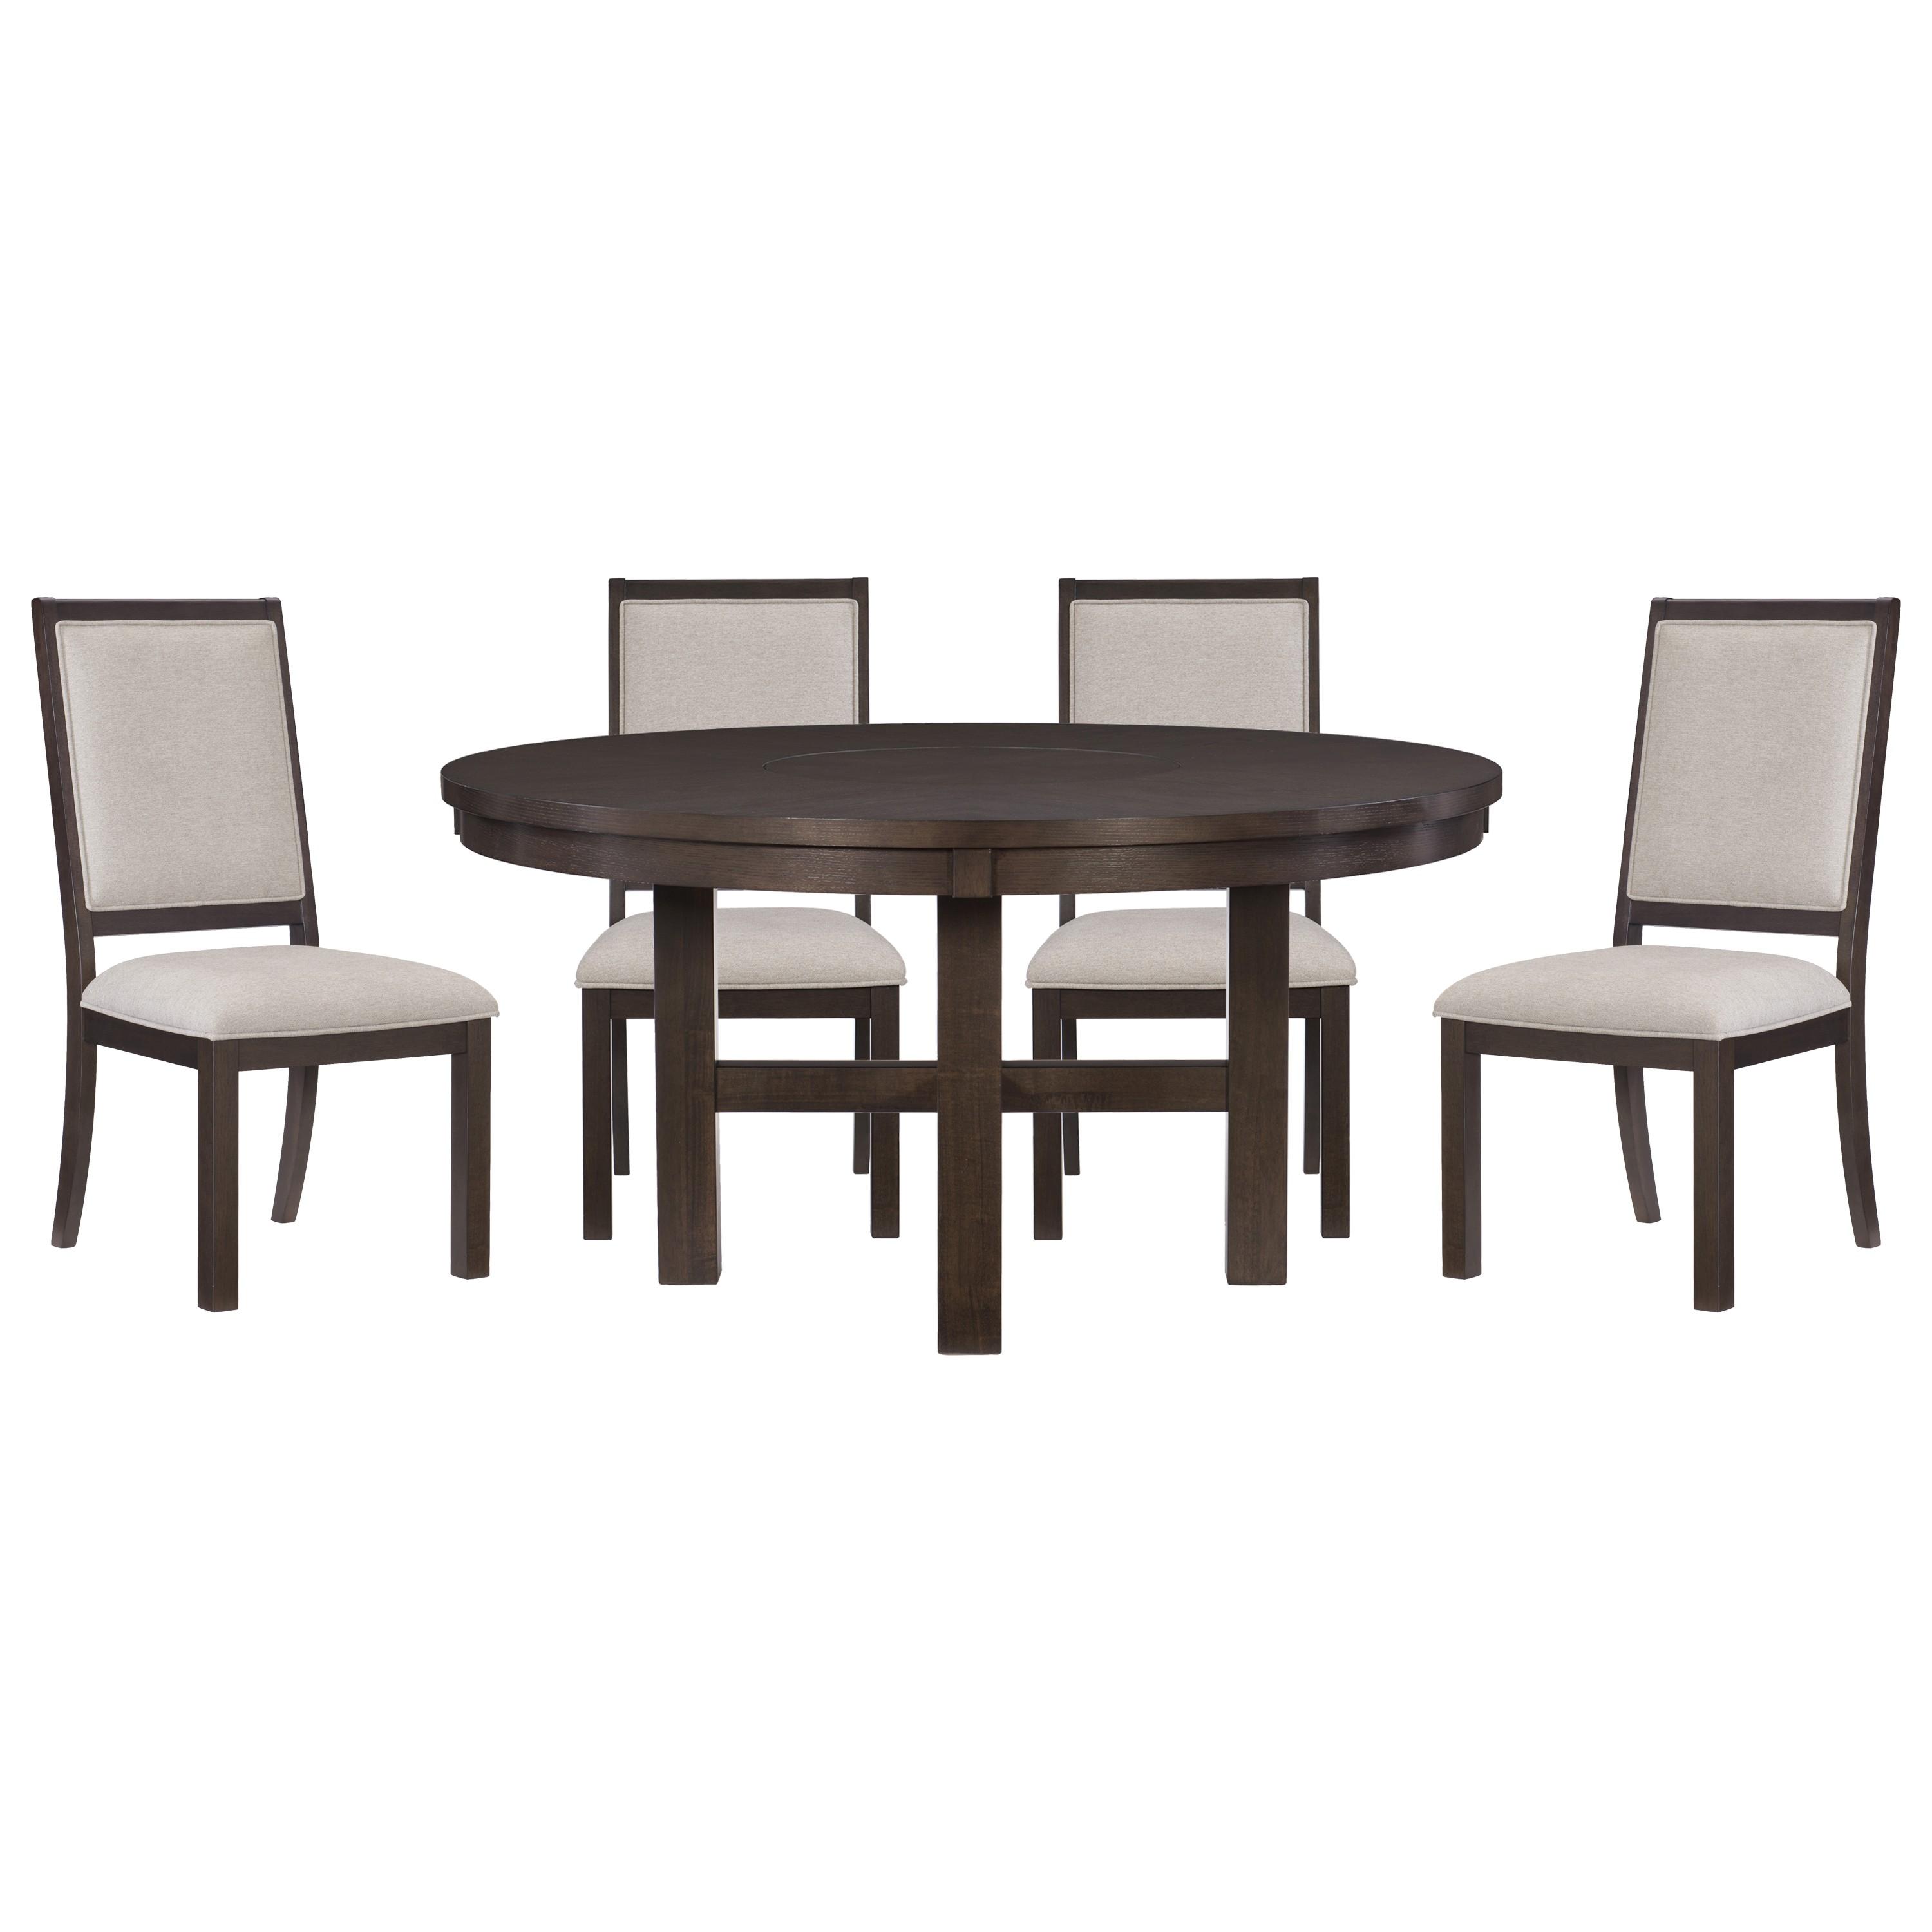 Transitional Dining Room Set 5718-60*5PC Josie 5718-60*5PC in Espresso Polyester